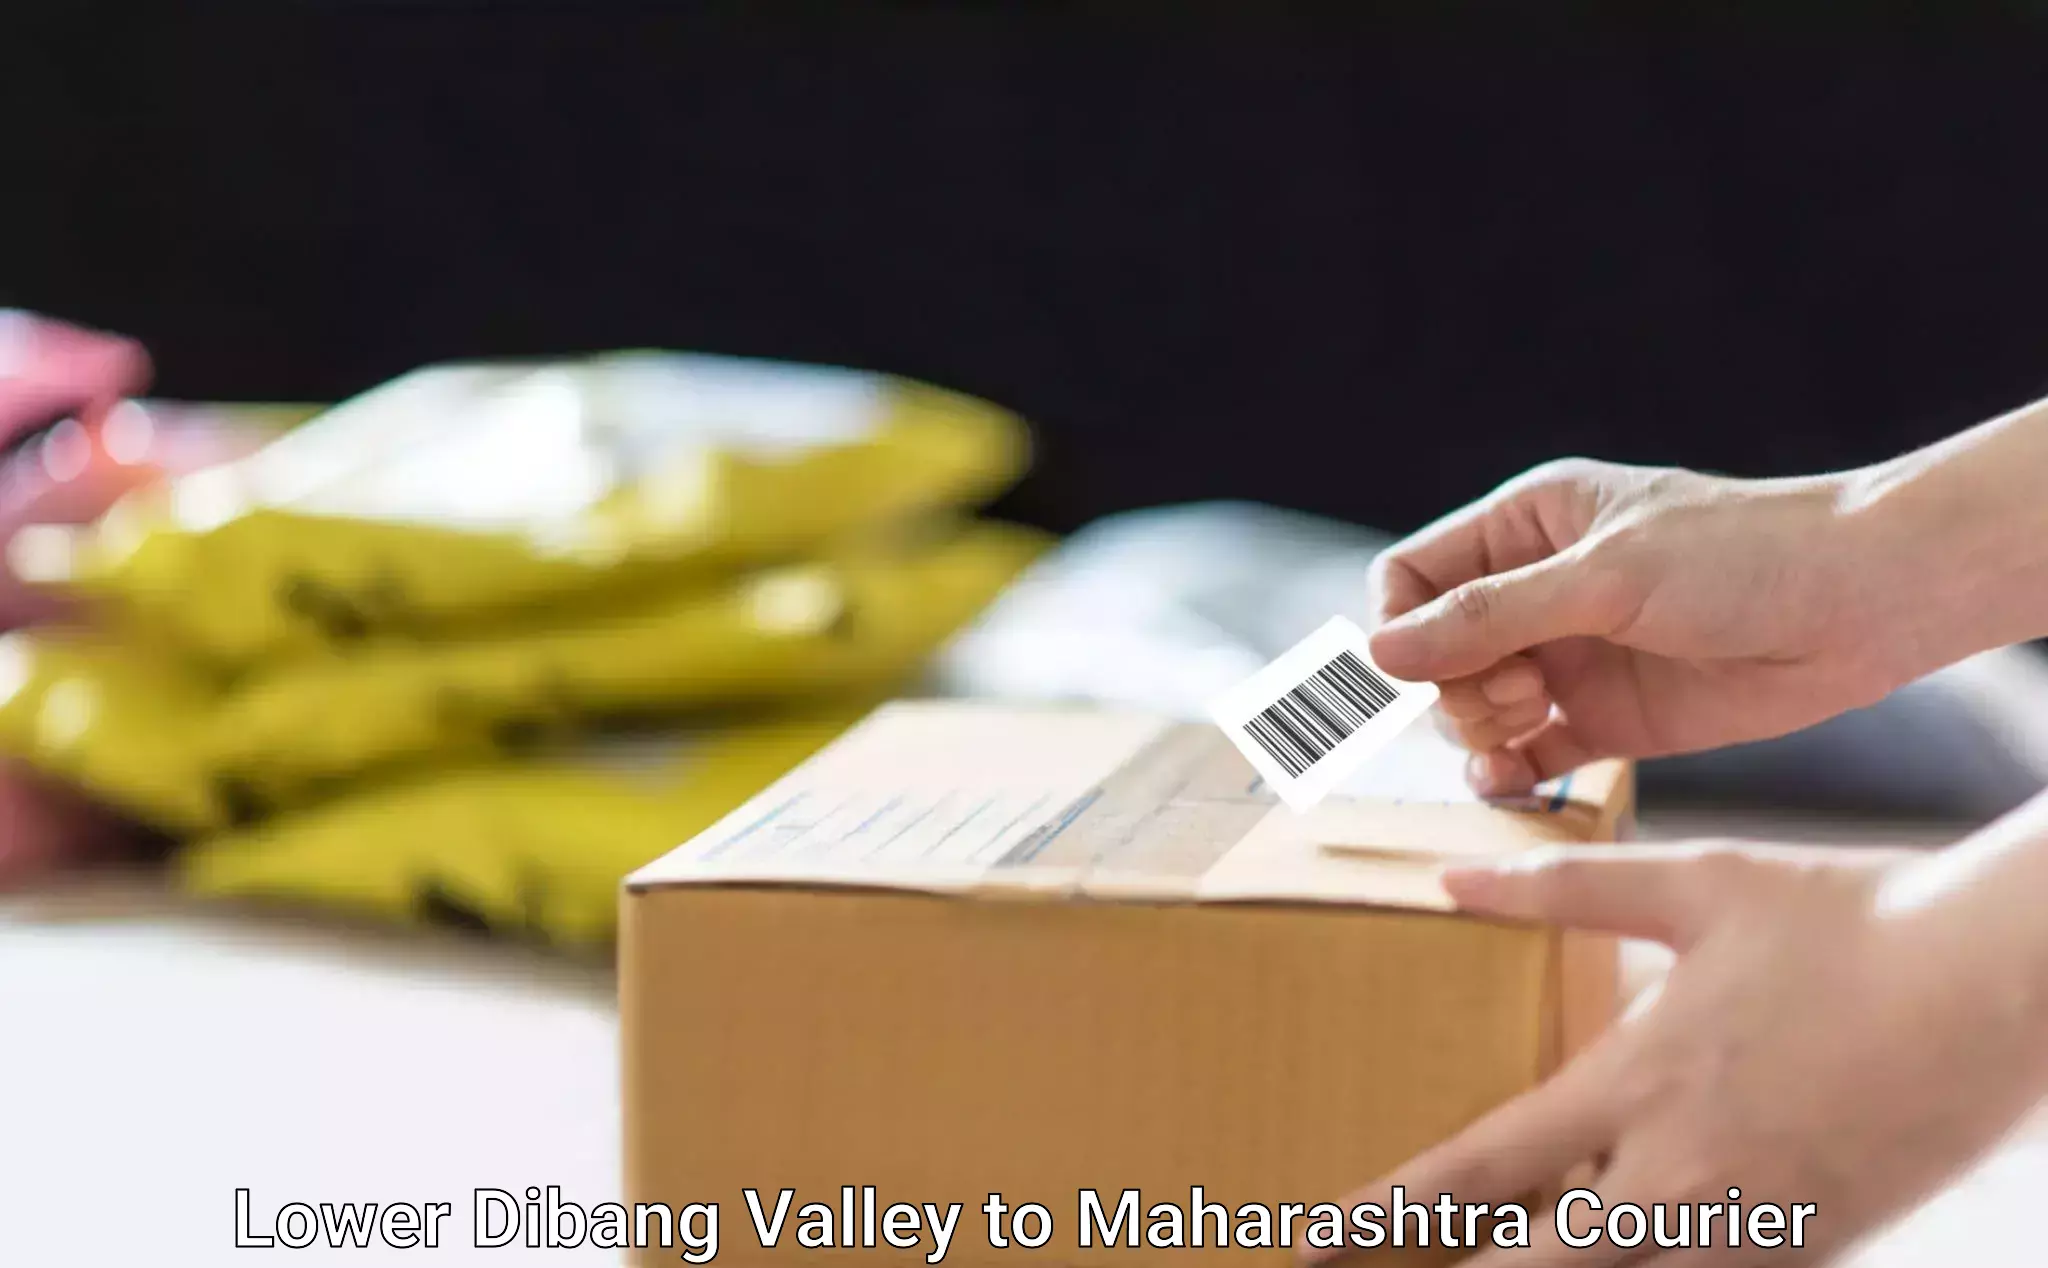 Express logistics providers Lower Dibang Valley to Dhule